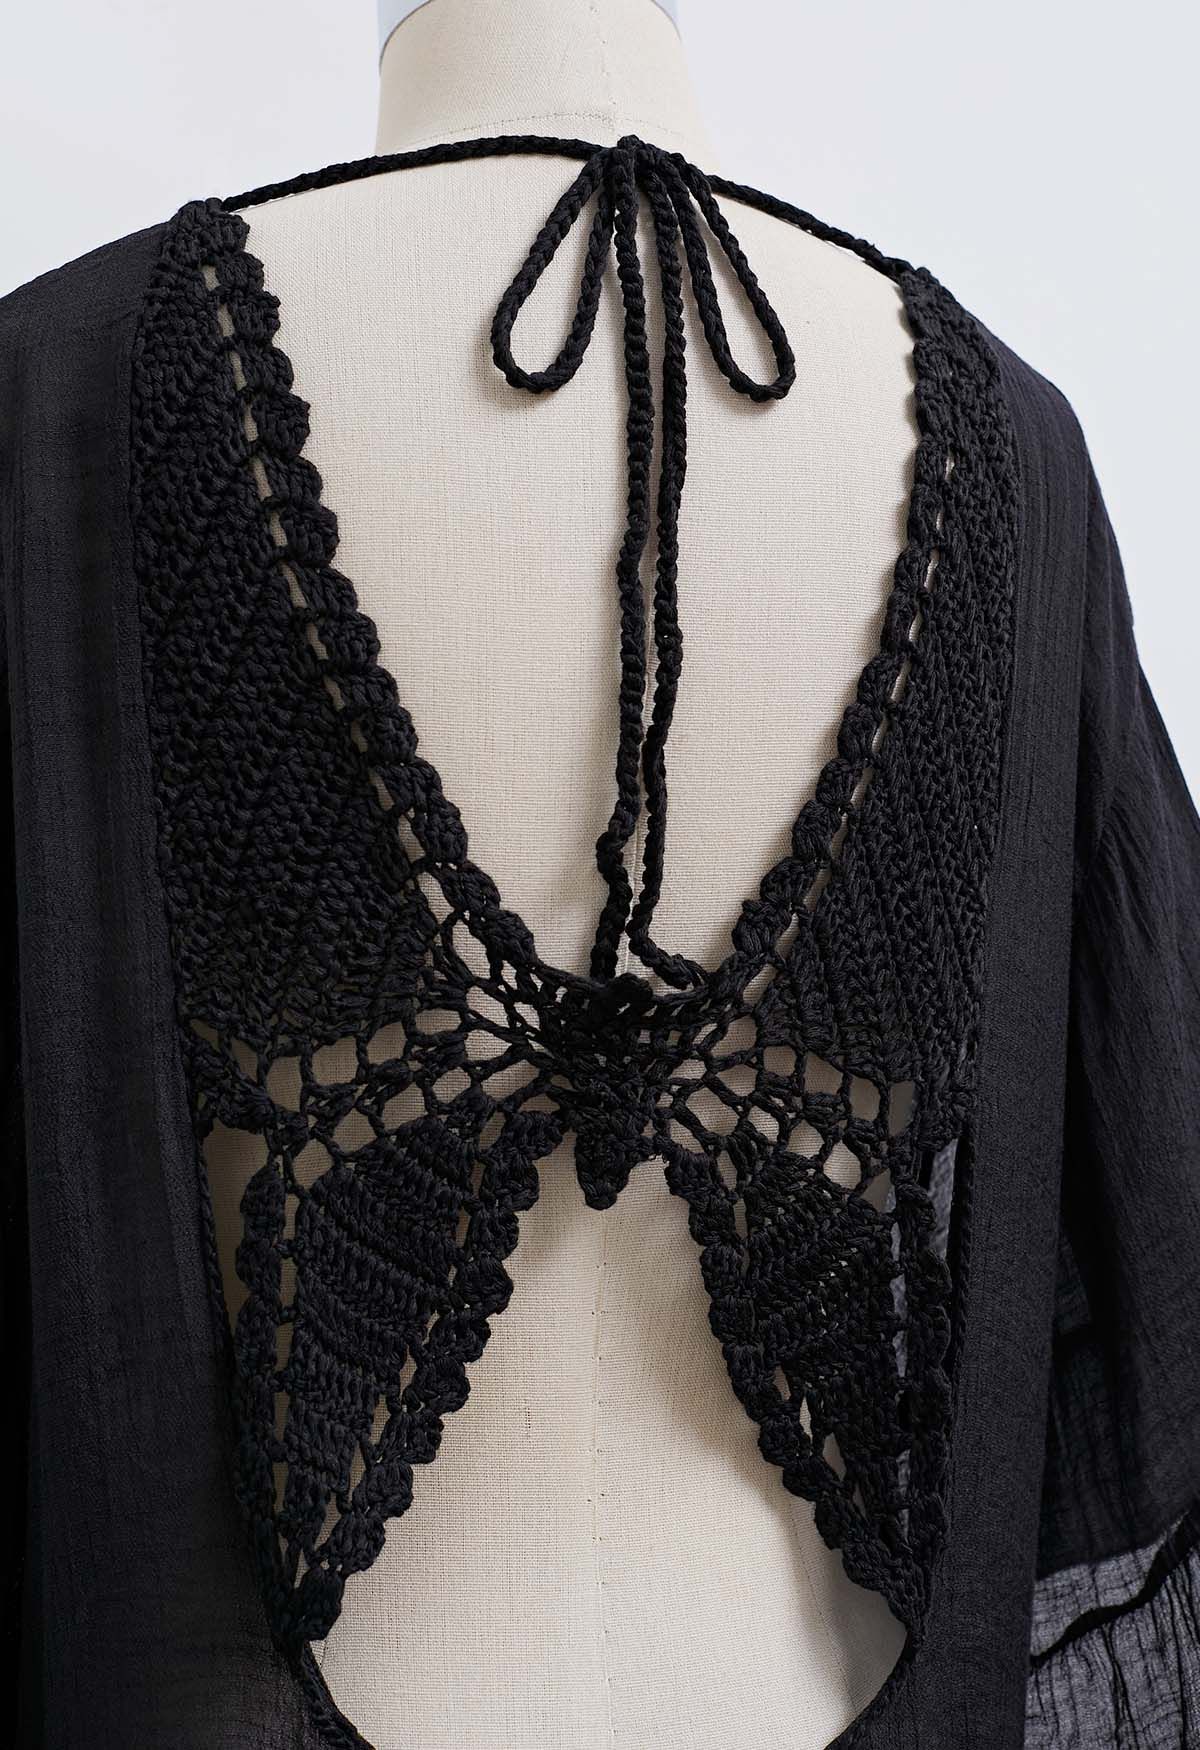 Butterfly Crochet Backless Cover-Up Dress in Black